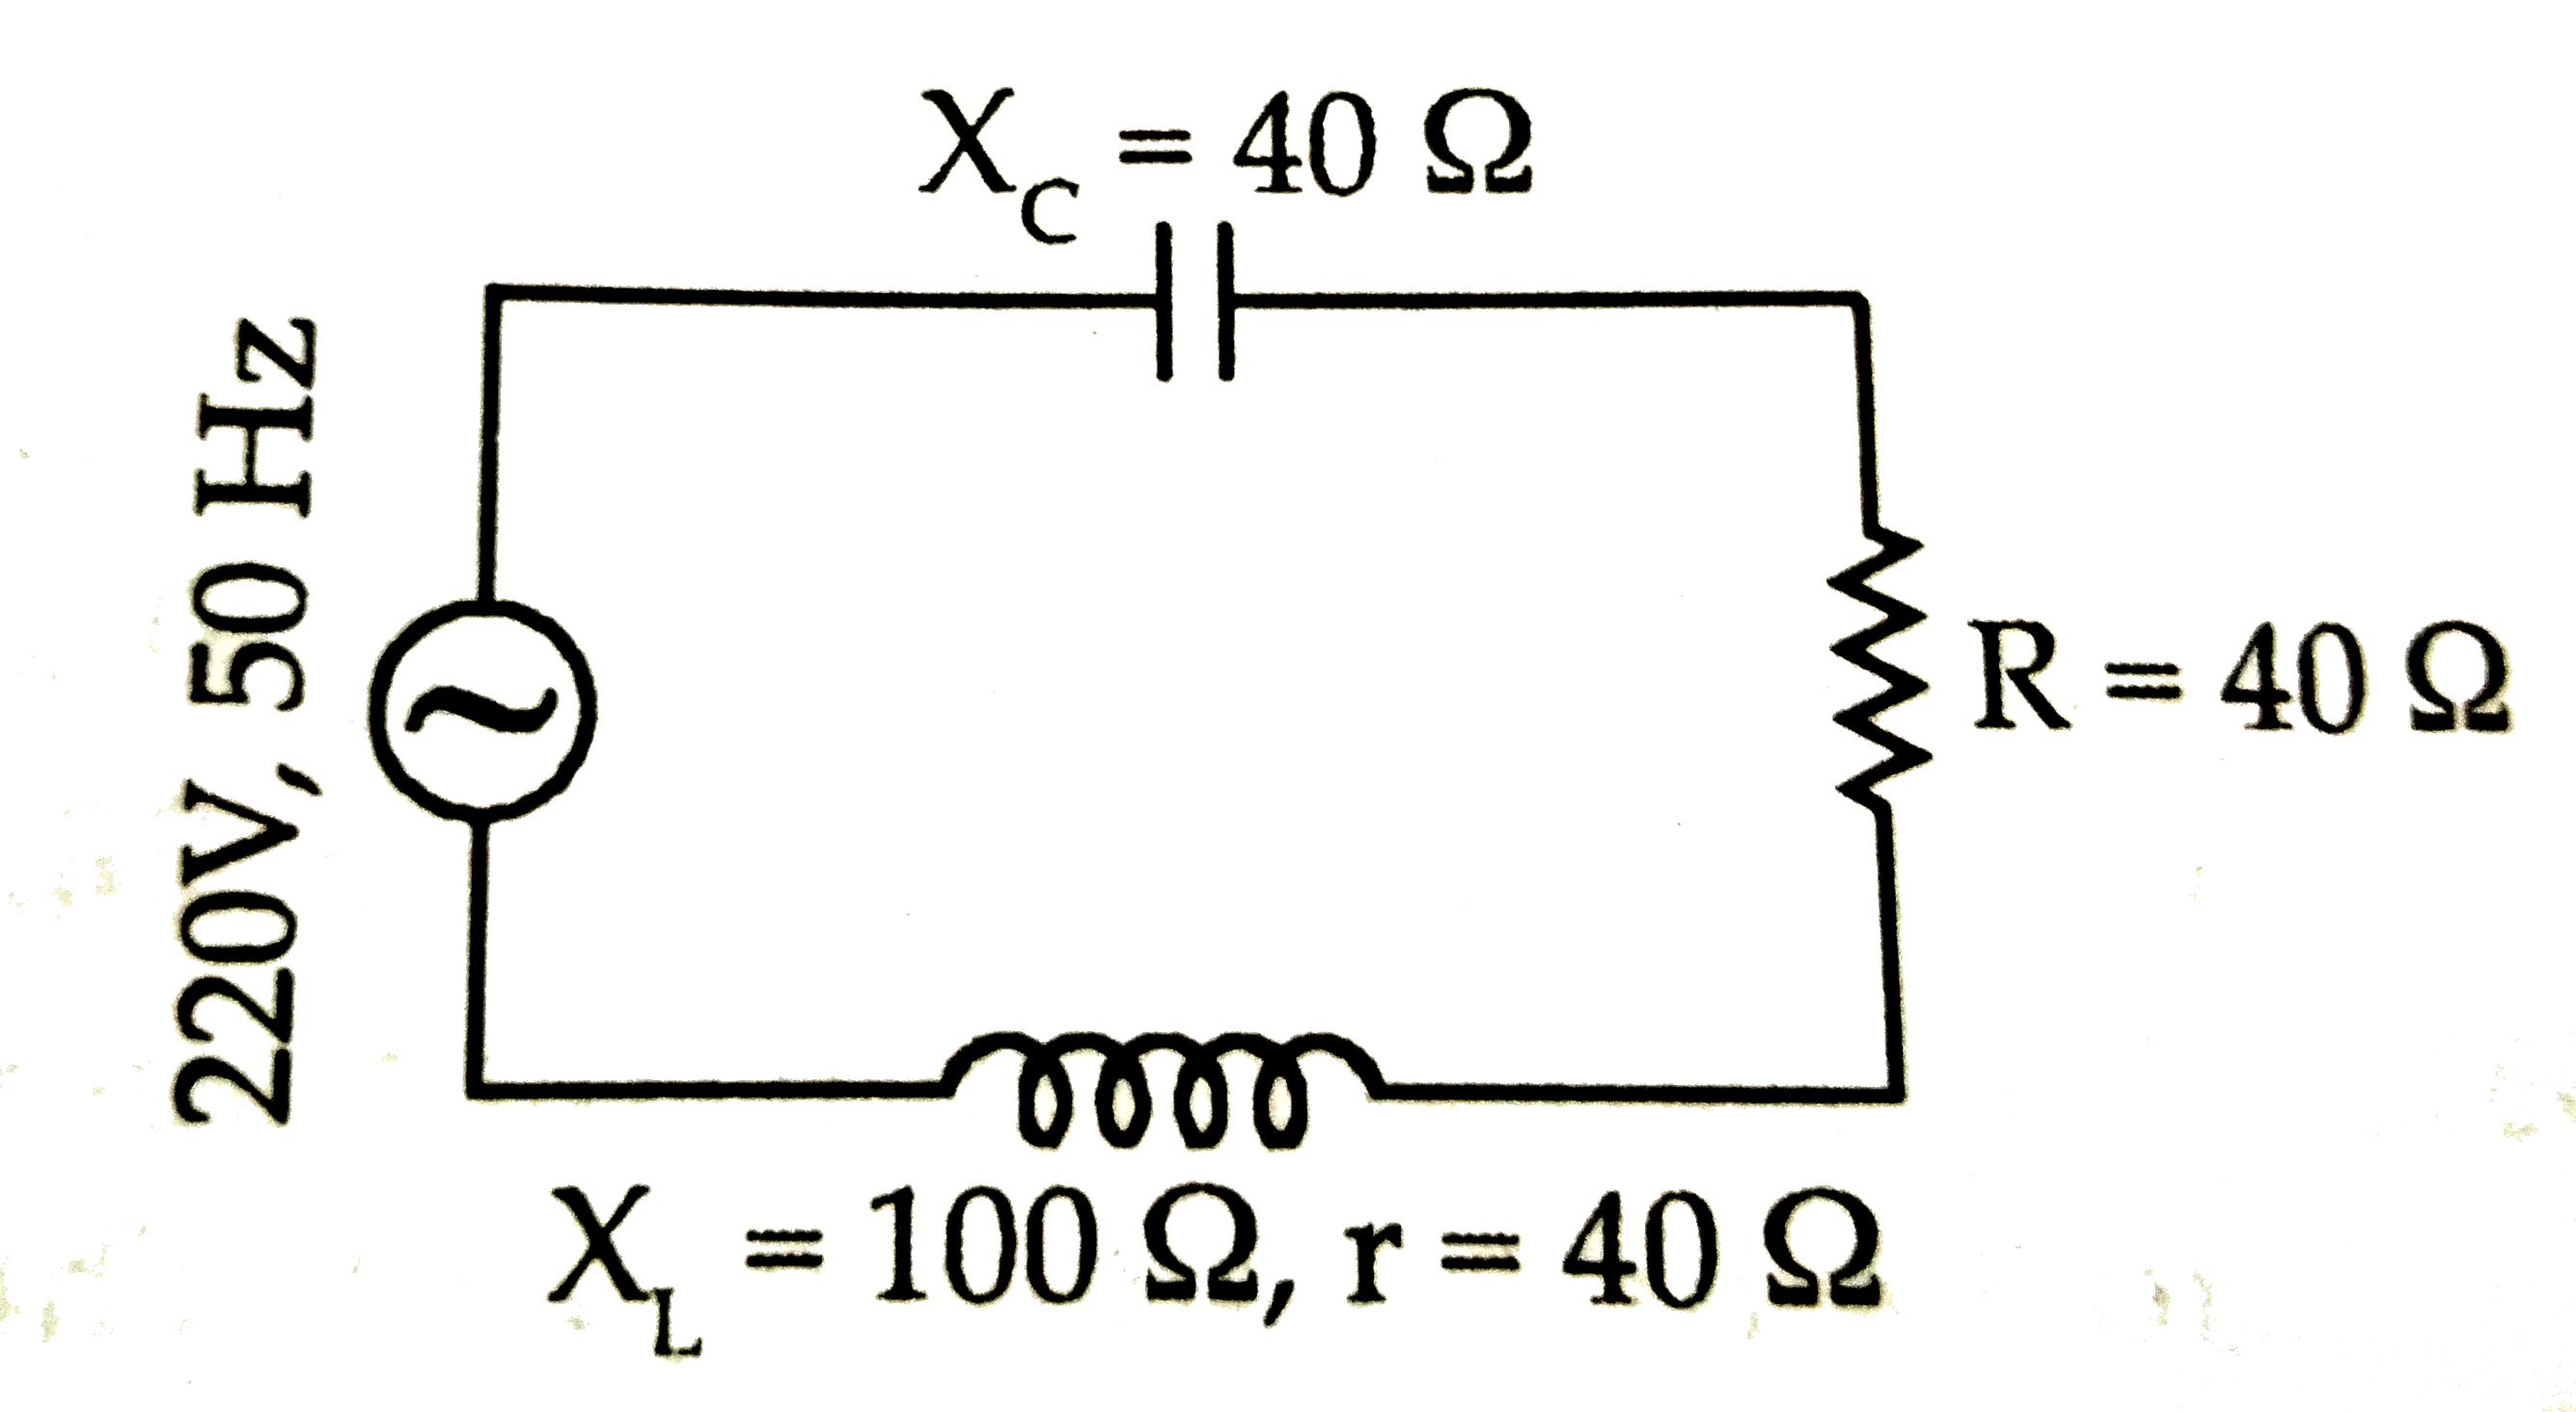 The power factor of the circuit shown in figure is